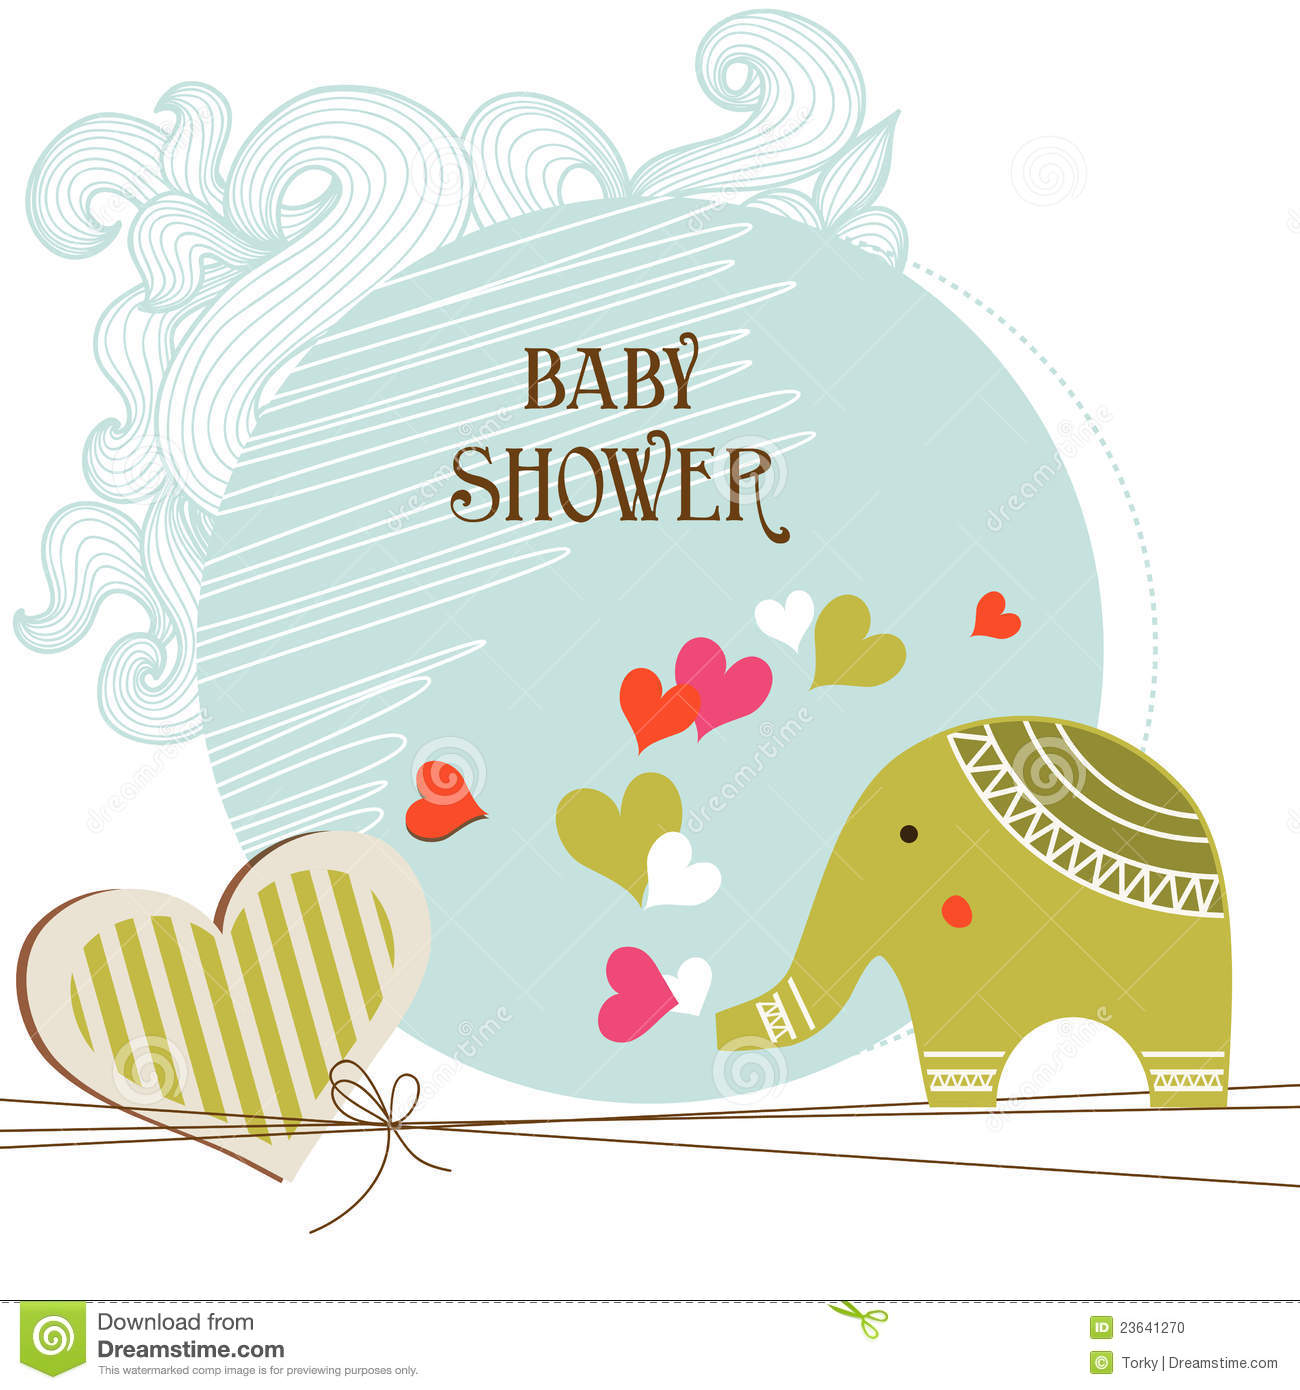 Baby Shower for Birthline Pregnancy Center -- Sunday, May 3rd, 10am-1pm in the California Room